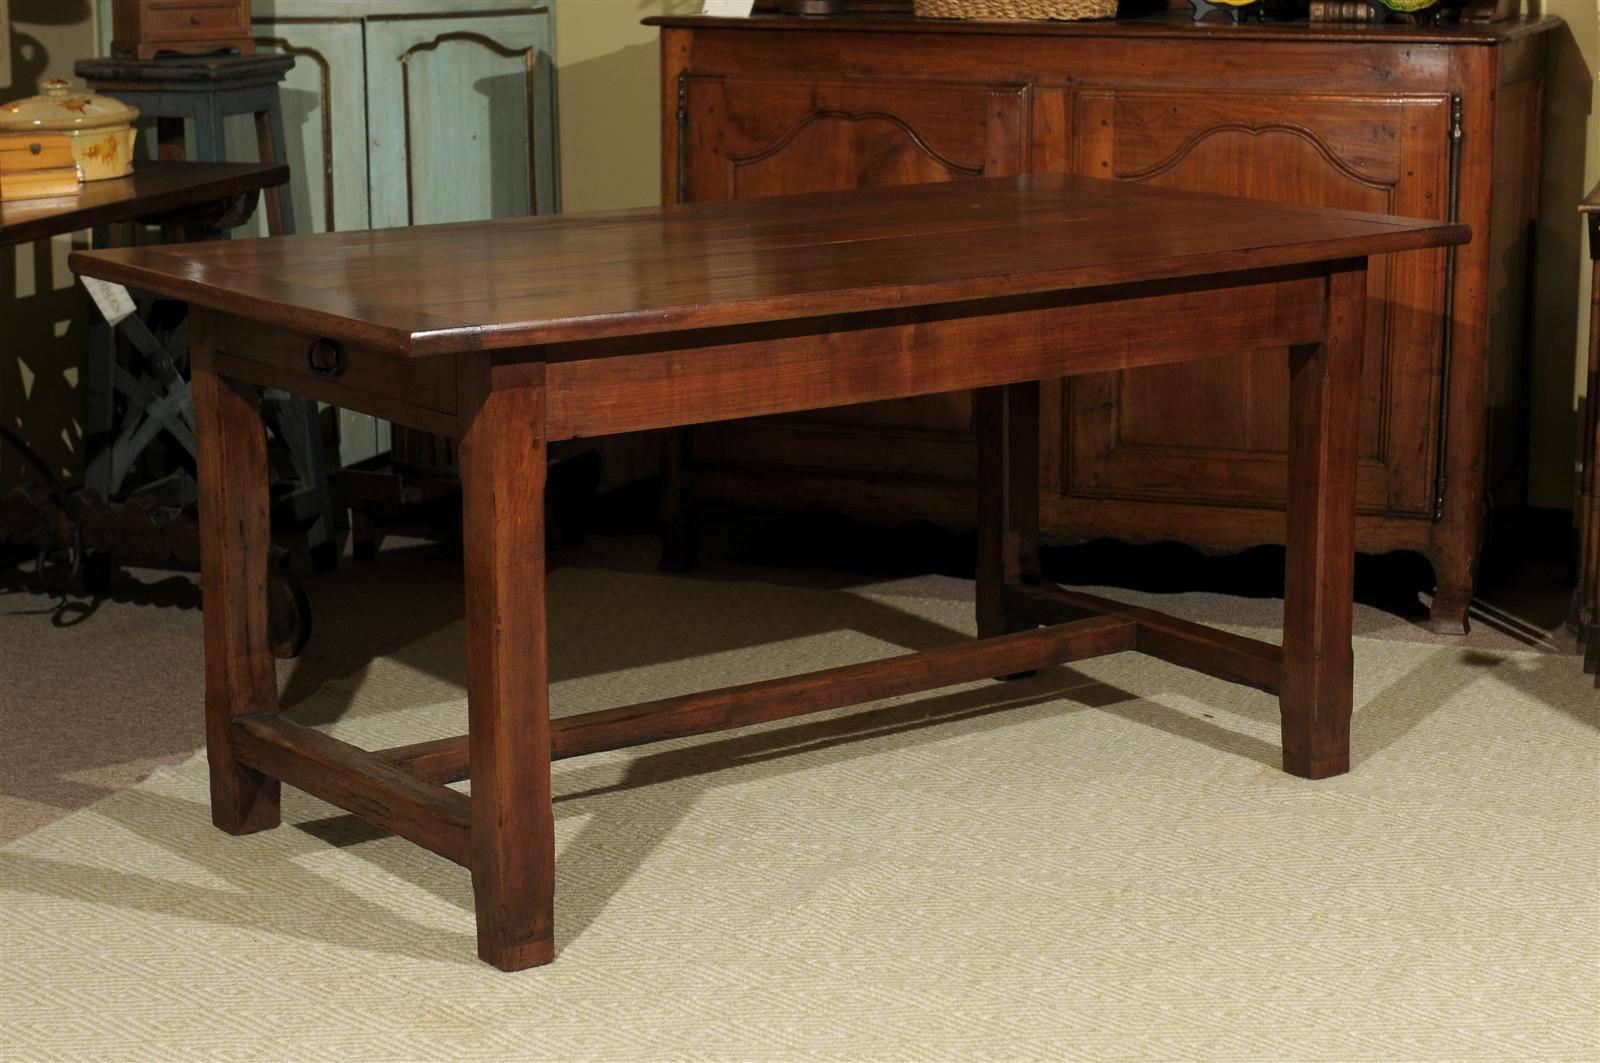 This French farm table is all original. It is solid cherry with a plank top and stretcher base. There are large drawers at each end for great storage. It is a lovely yet simple table that looks great in most spaces and with just about any style of